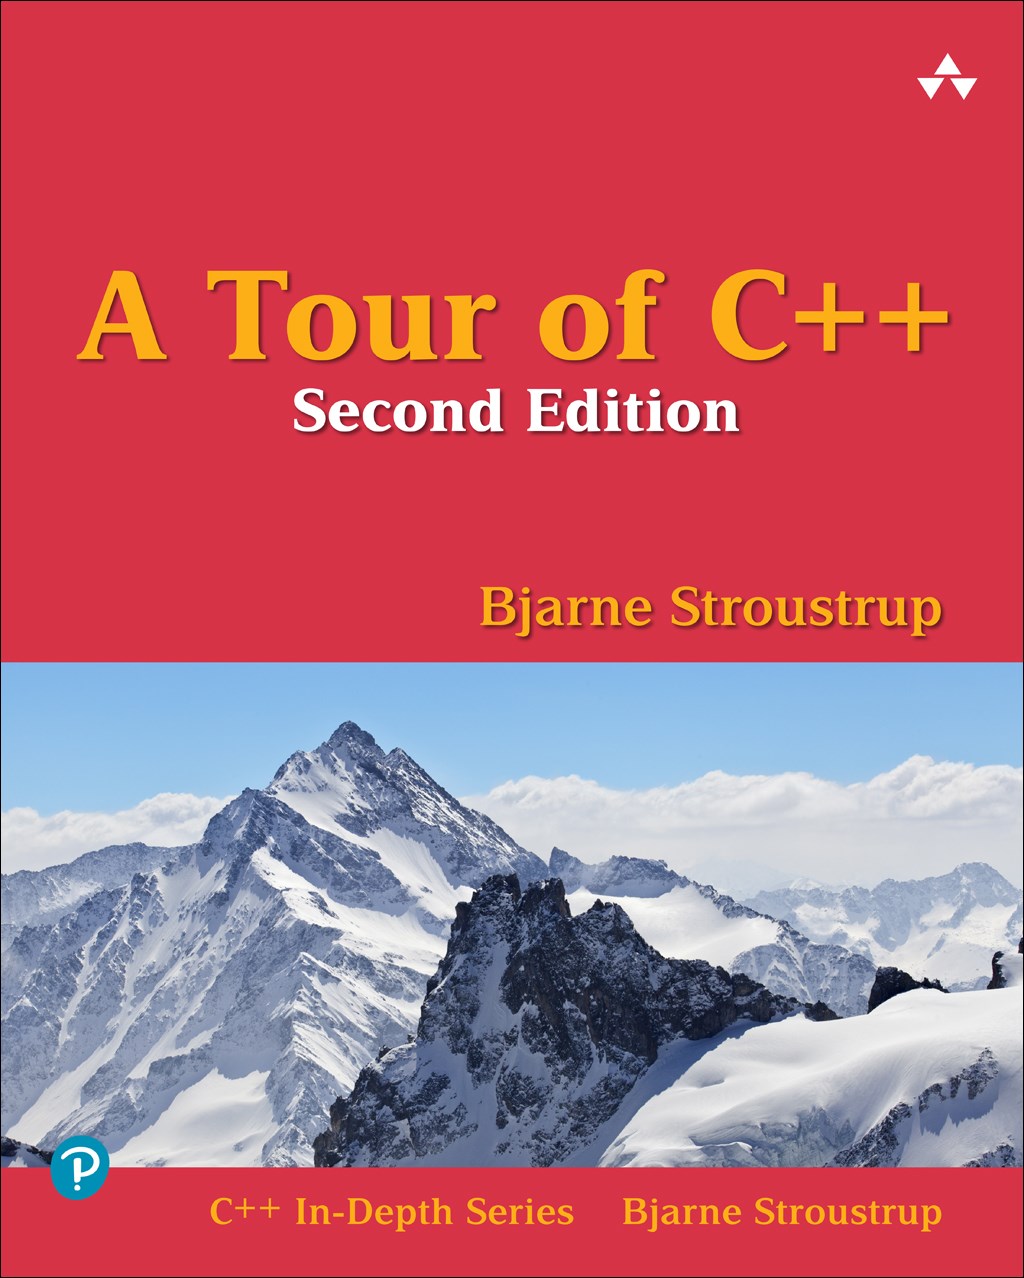 A Tour of C++, 2nd Edition